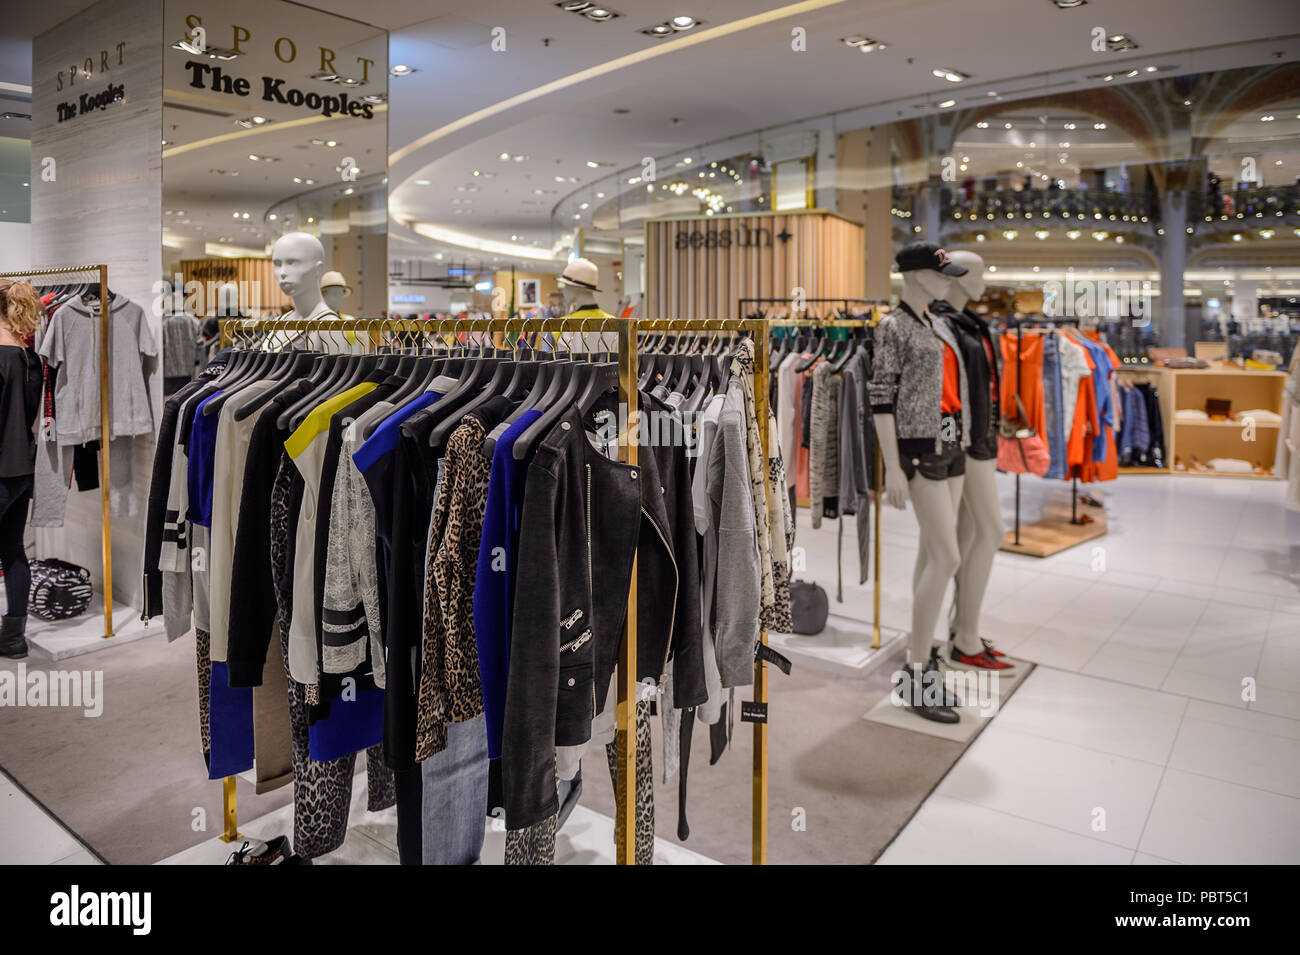 PARIS, FRANCE - JUN 6, 2015: Sport the Kooples in the Galeries Lafayette city mall. It was open in 1912 Stock Photo